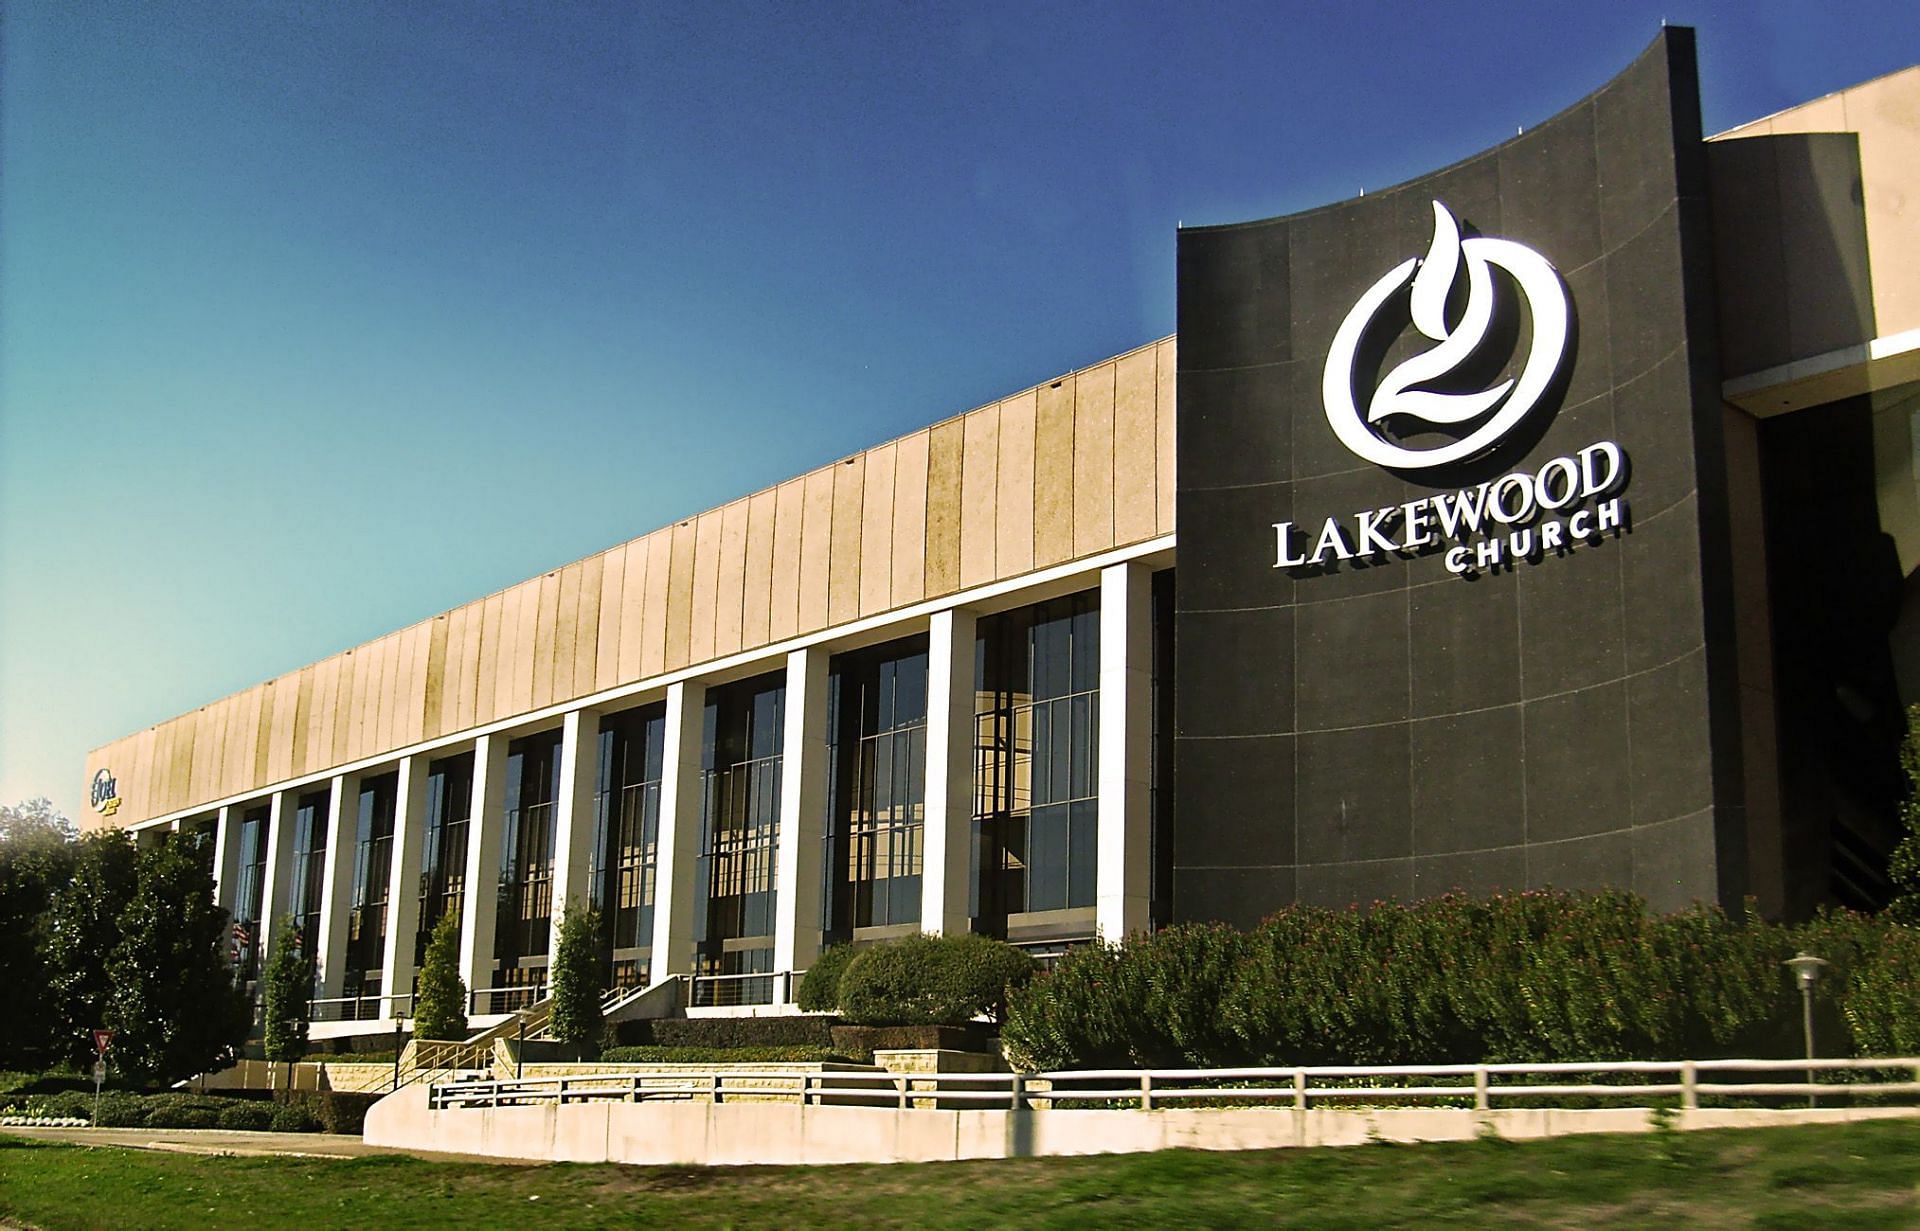 Social media users left in shock as woman enters the Lakewood Church and begins firing: More details revealed as shooting leaves 2 injured. (Image via Lakewood Church)